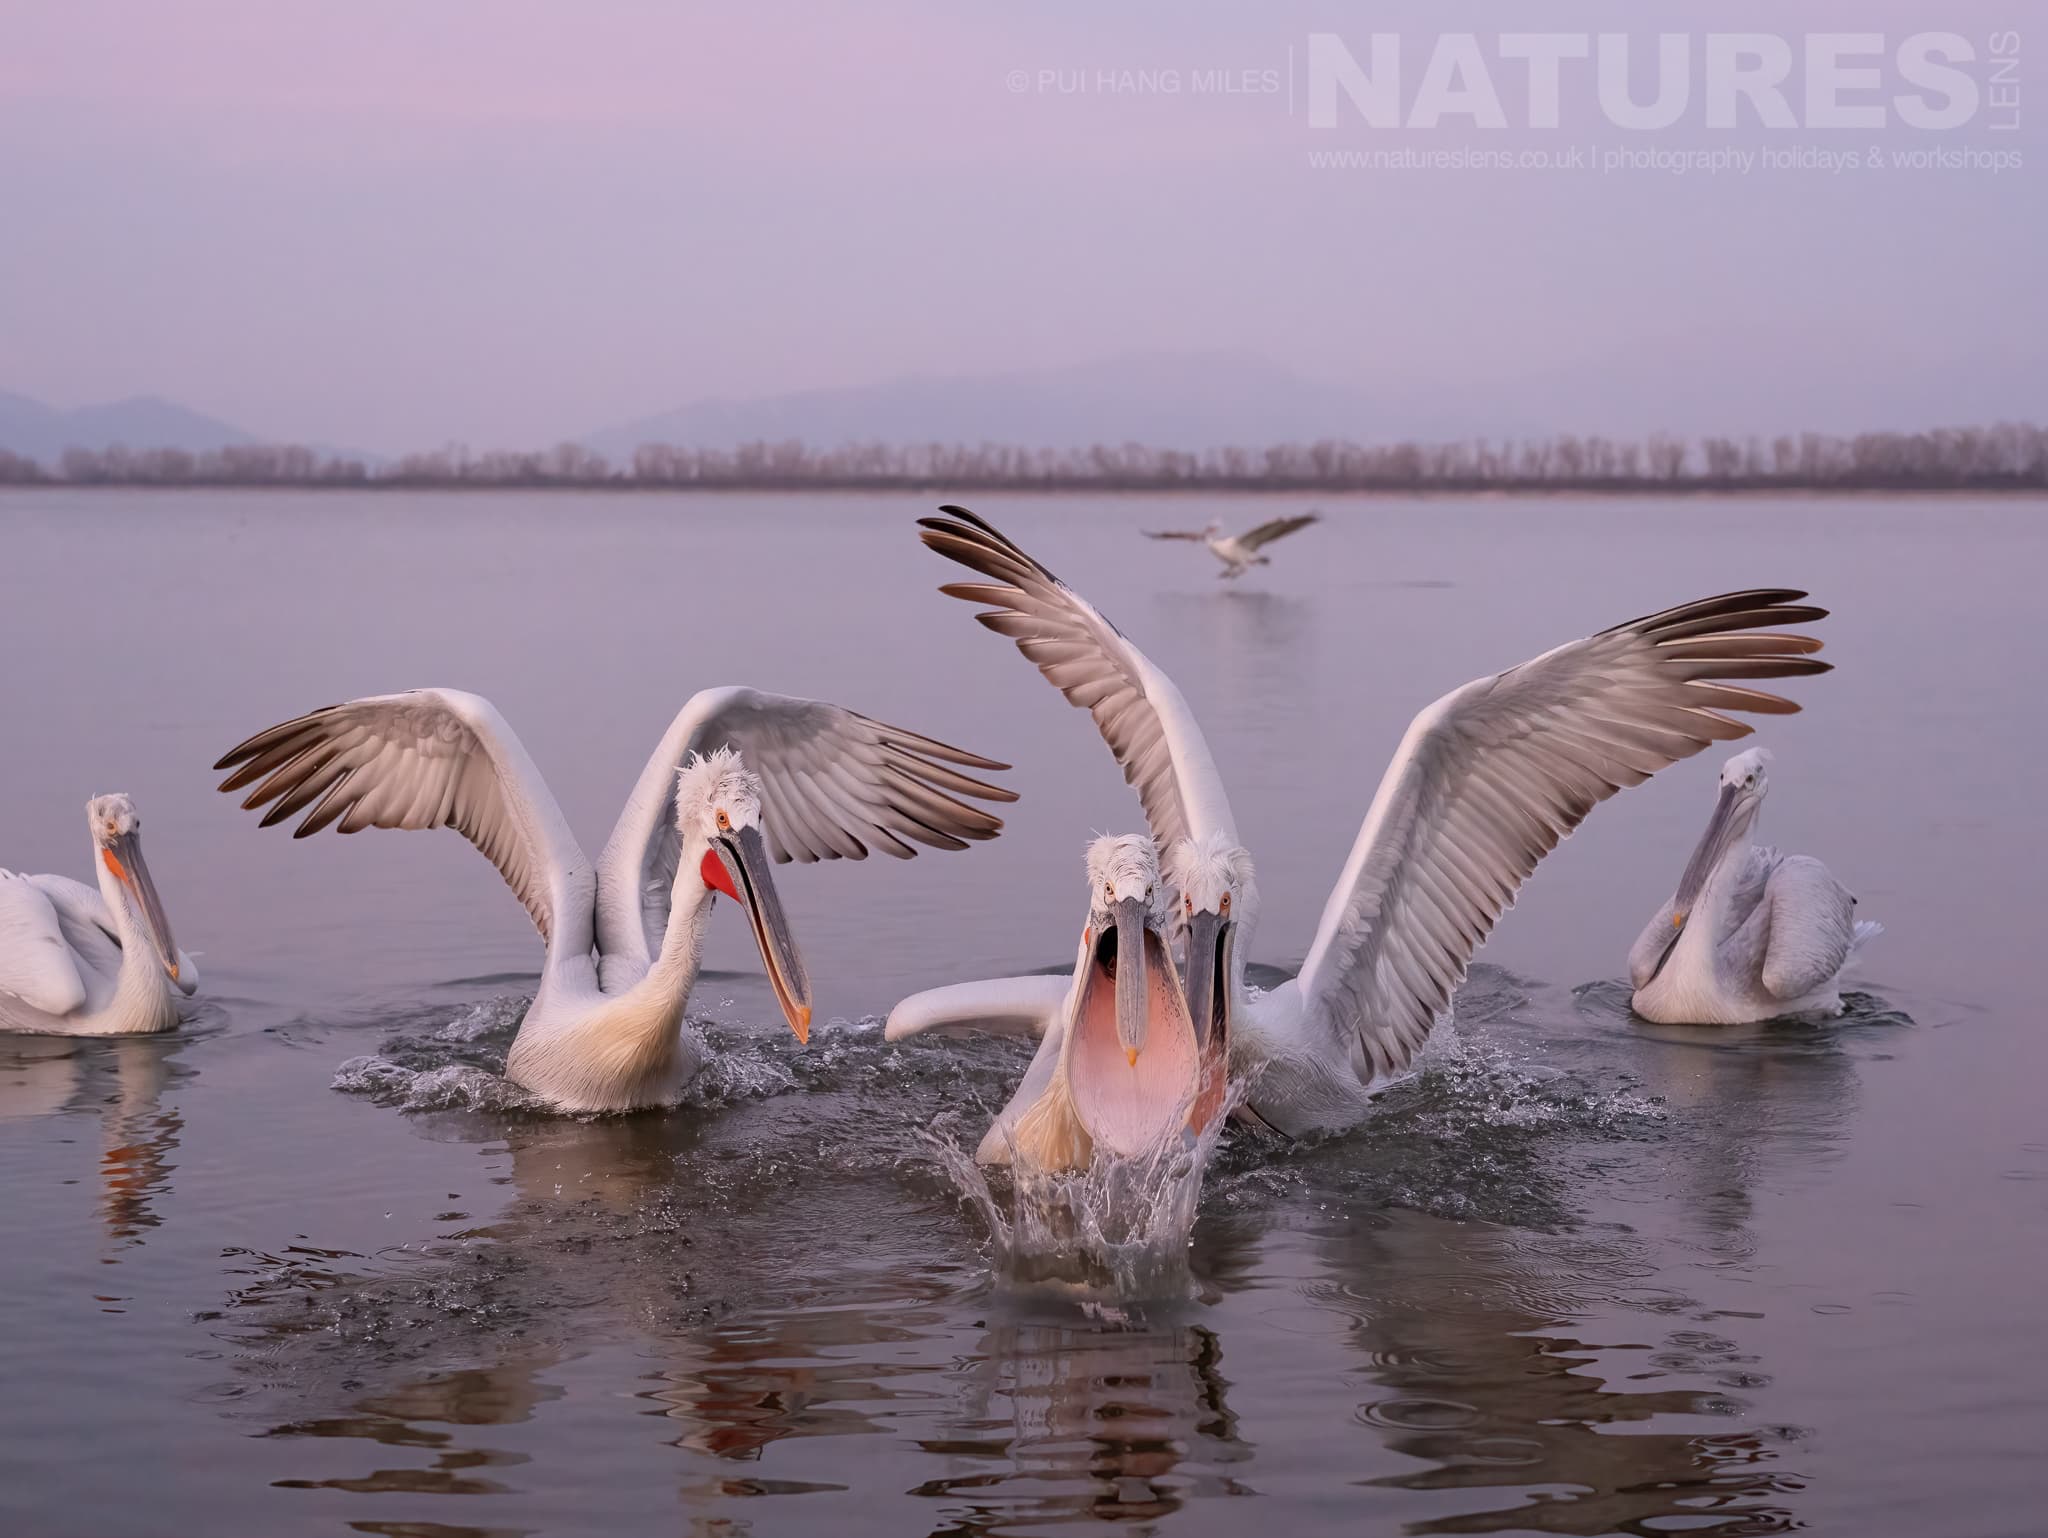 A Group Of The Pelicans Of Lake Kerkini At One Of The Shoreline Feeds Photographed During A Natureslens Pelicans Of Lake Kerkini Photography Holiday